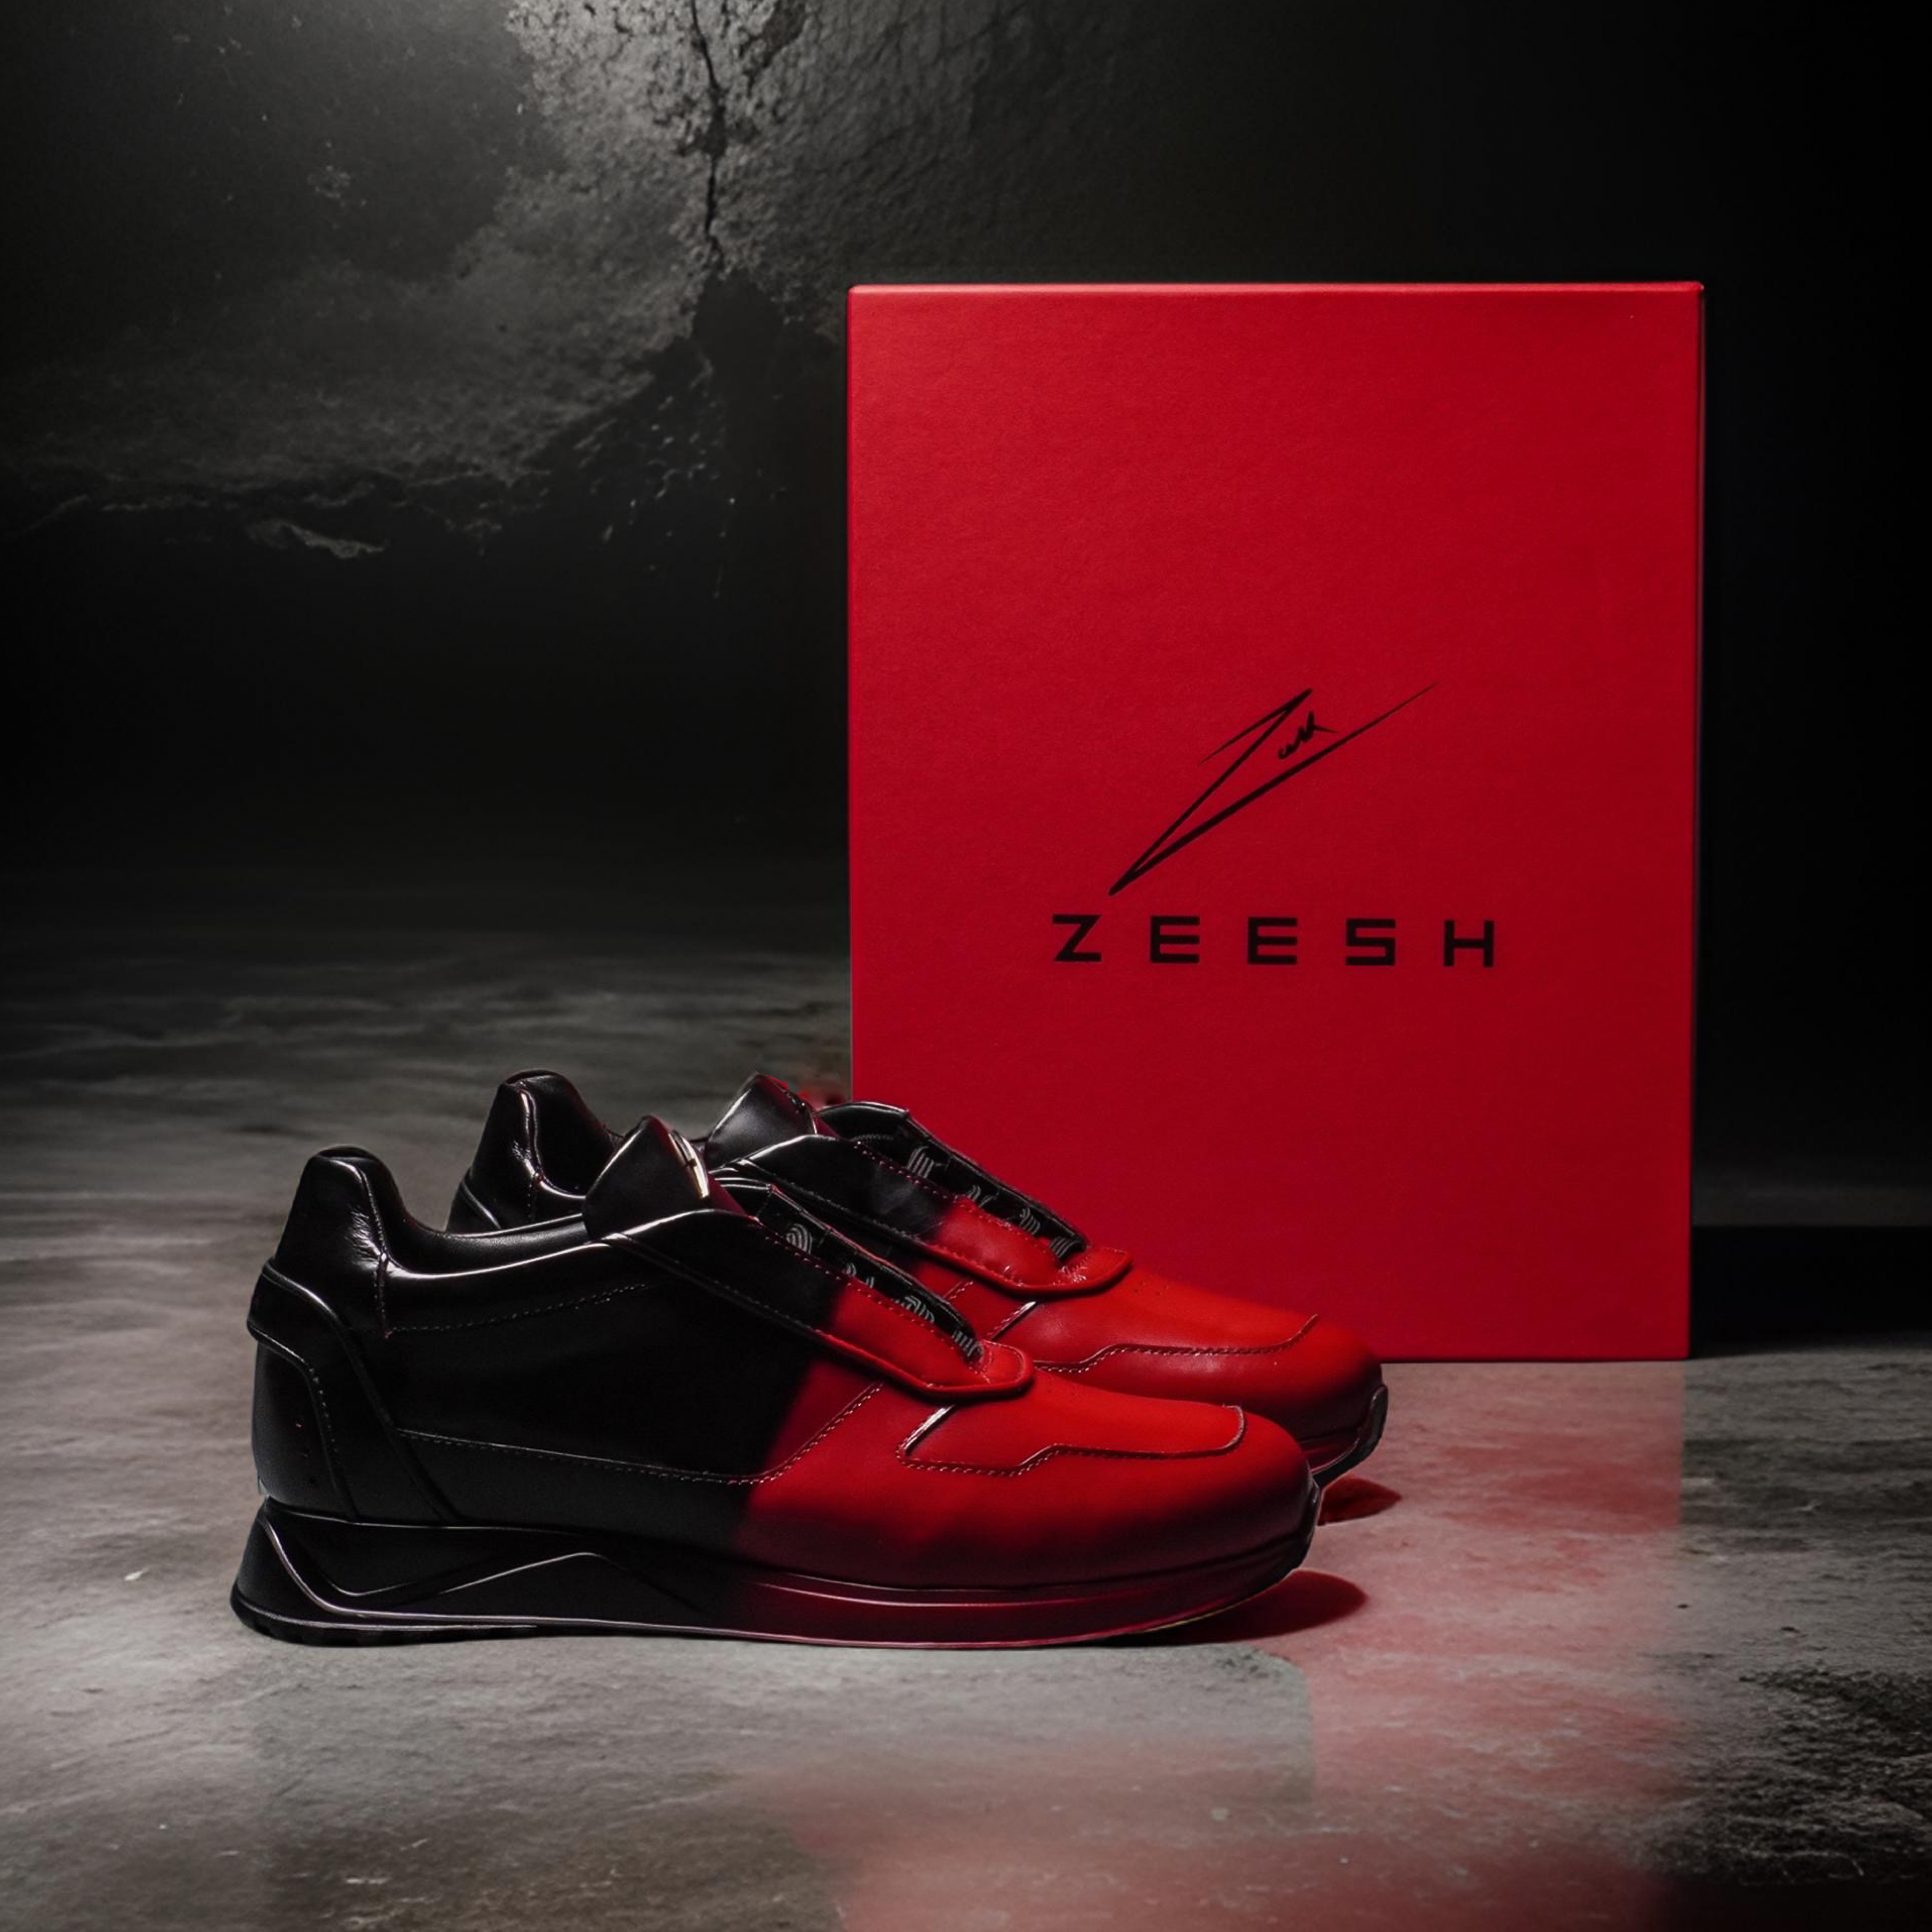 ZEESH celebrates third anniversary with exclusive sneaker launch